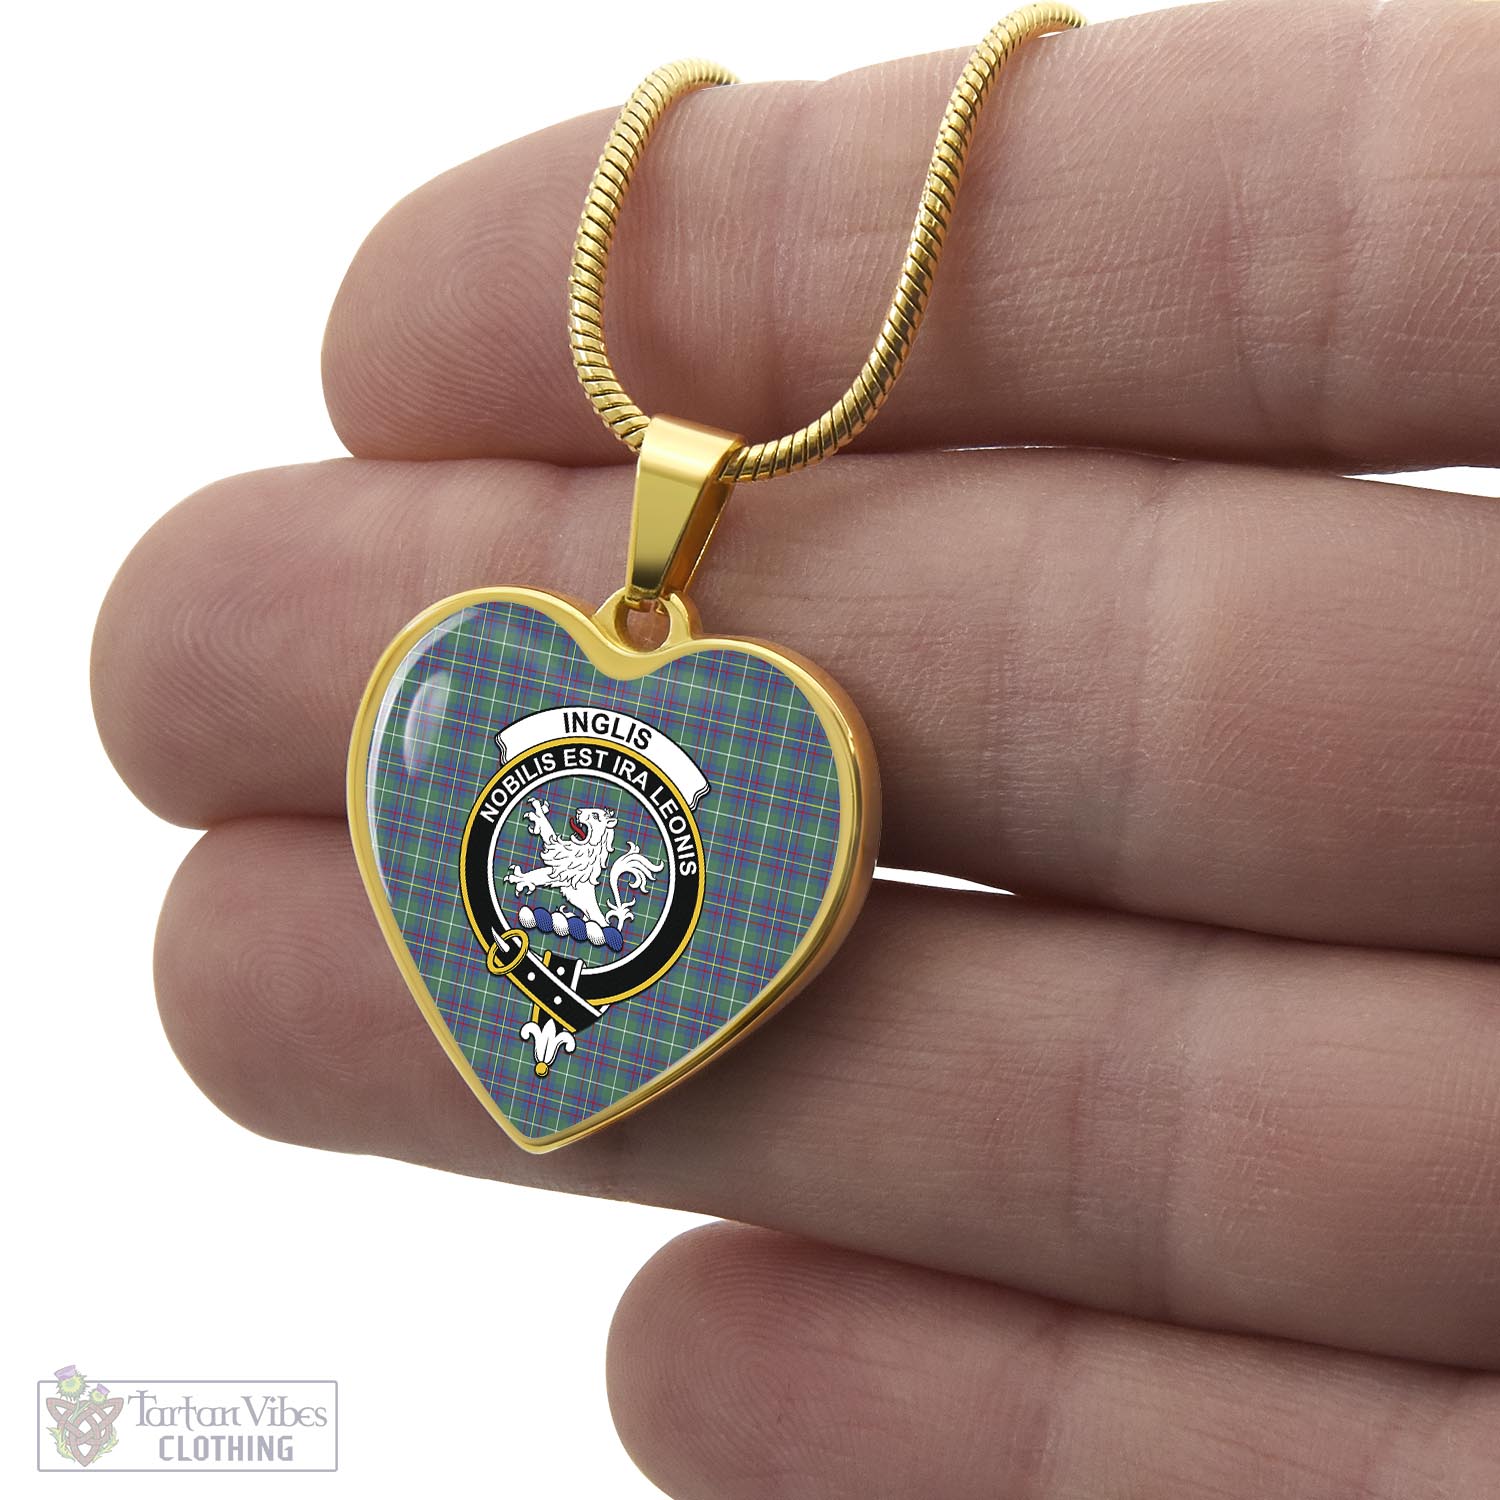 Tartan Vibes Clothing Inglis Ancient Tartan Heart Necklace with Family Crest